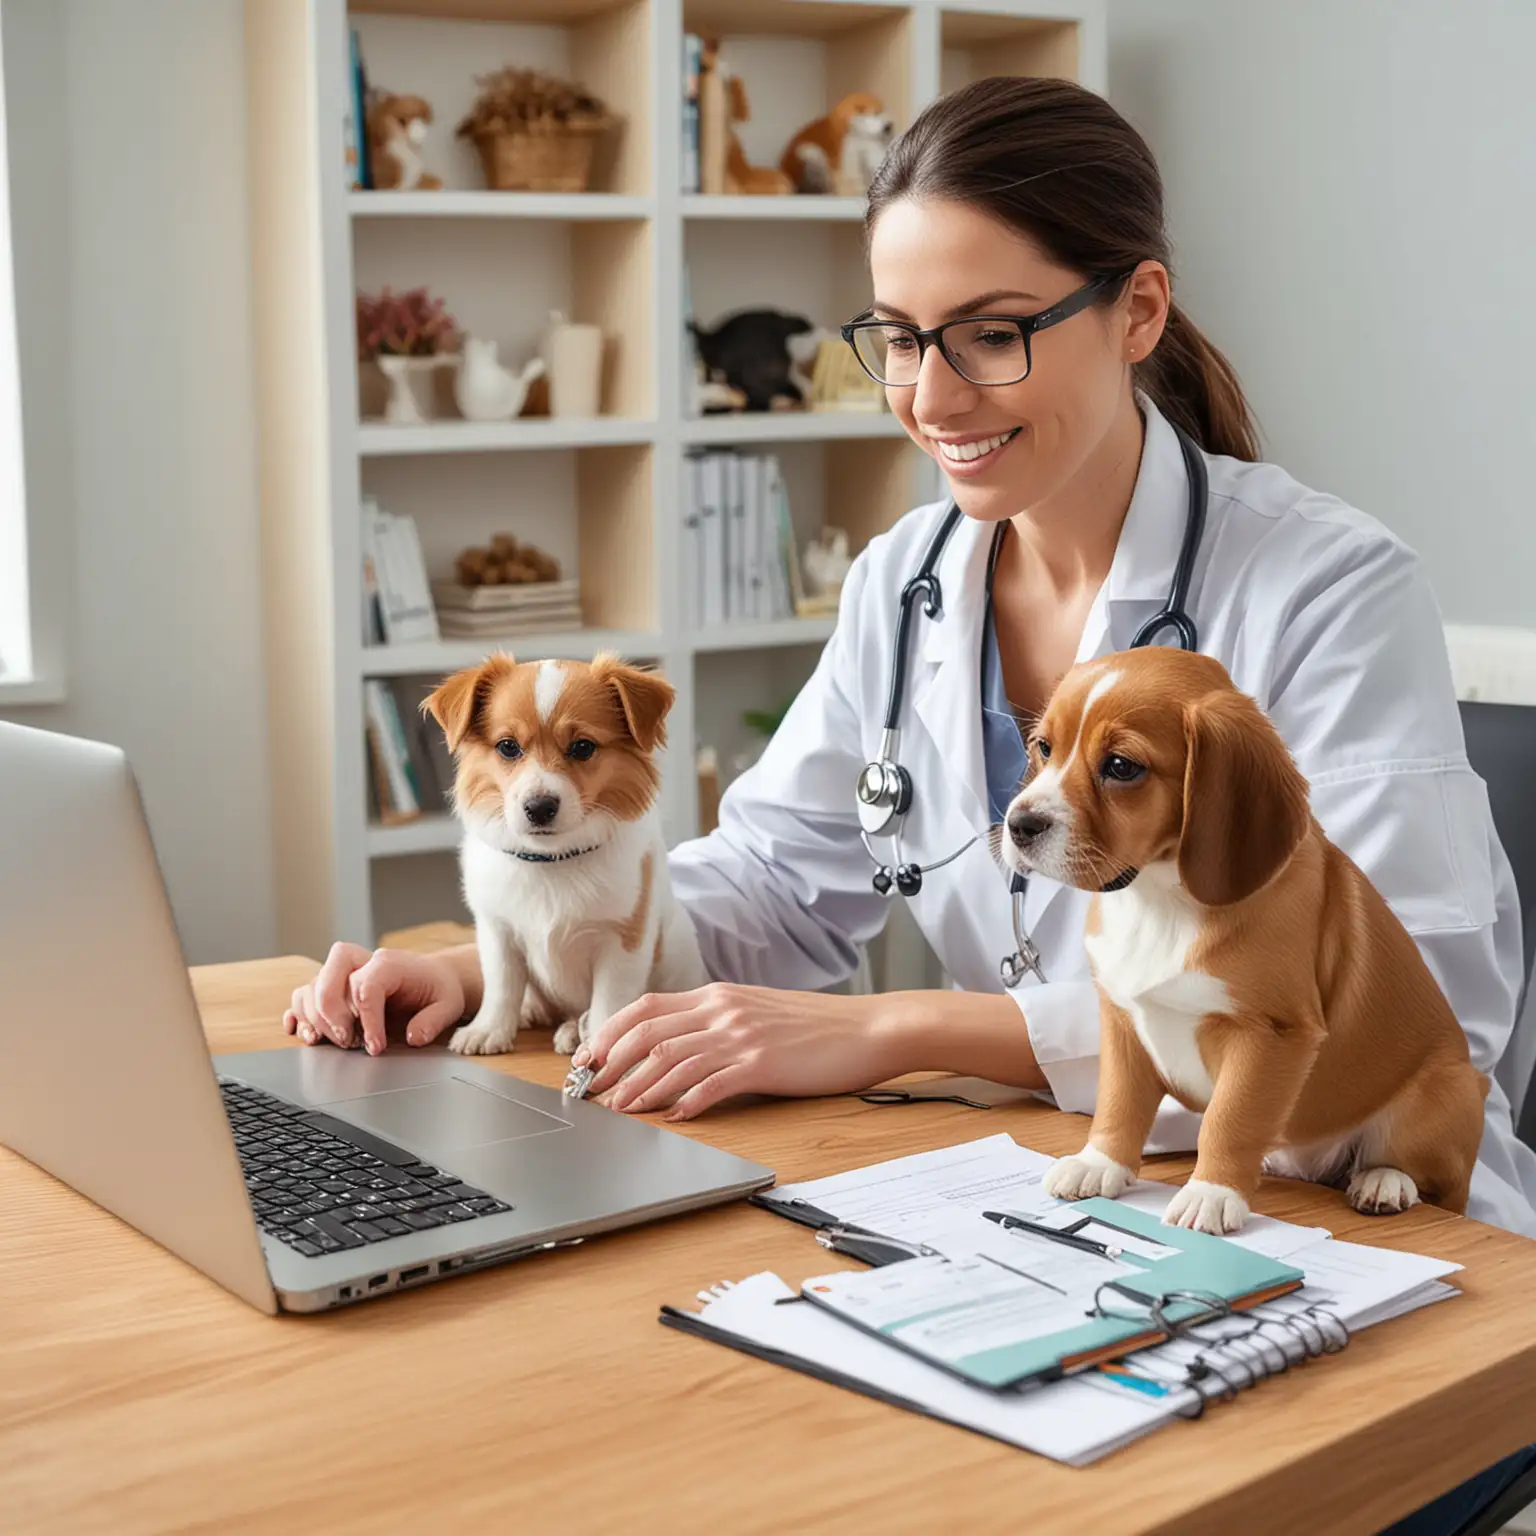 Veterinarian Working on Laptop with Pets on Desk